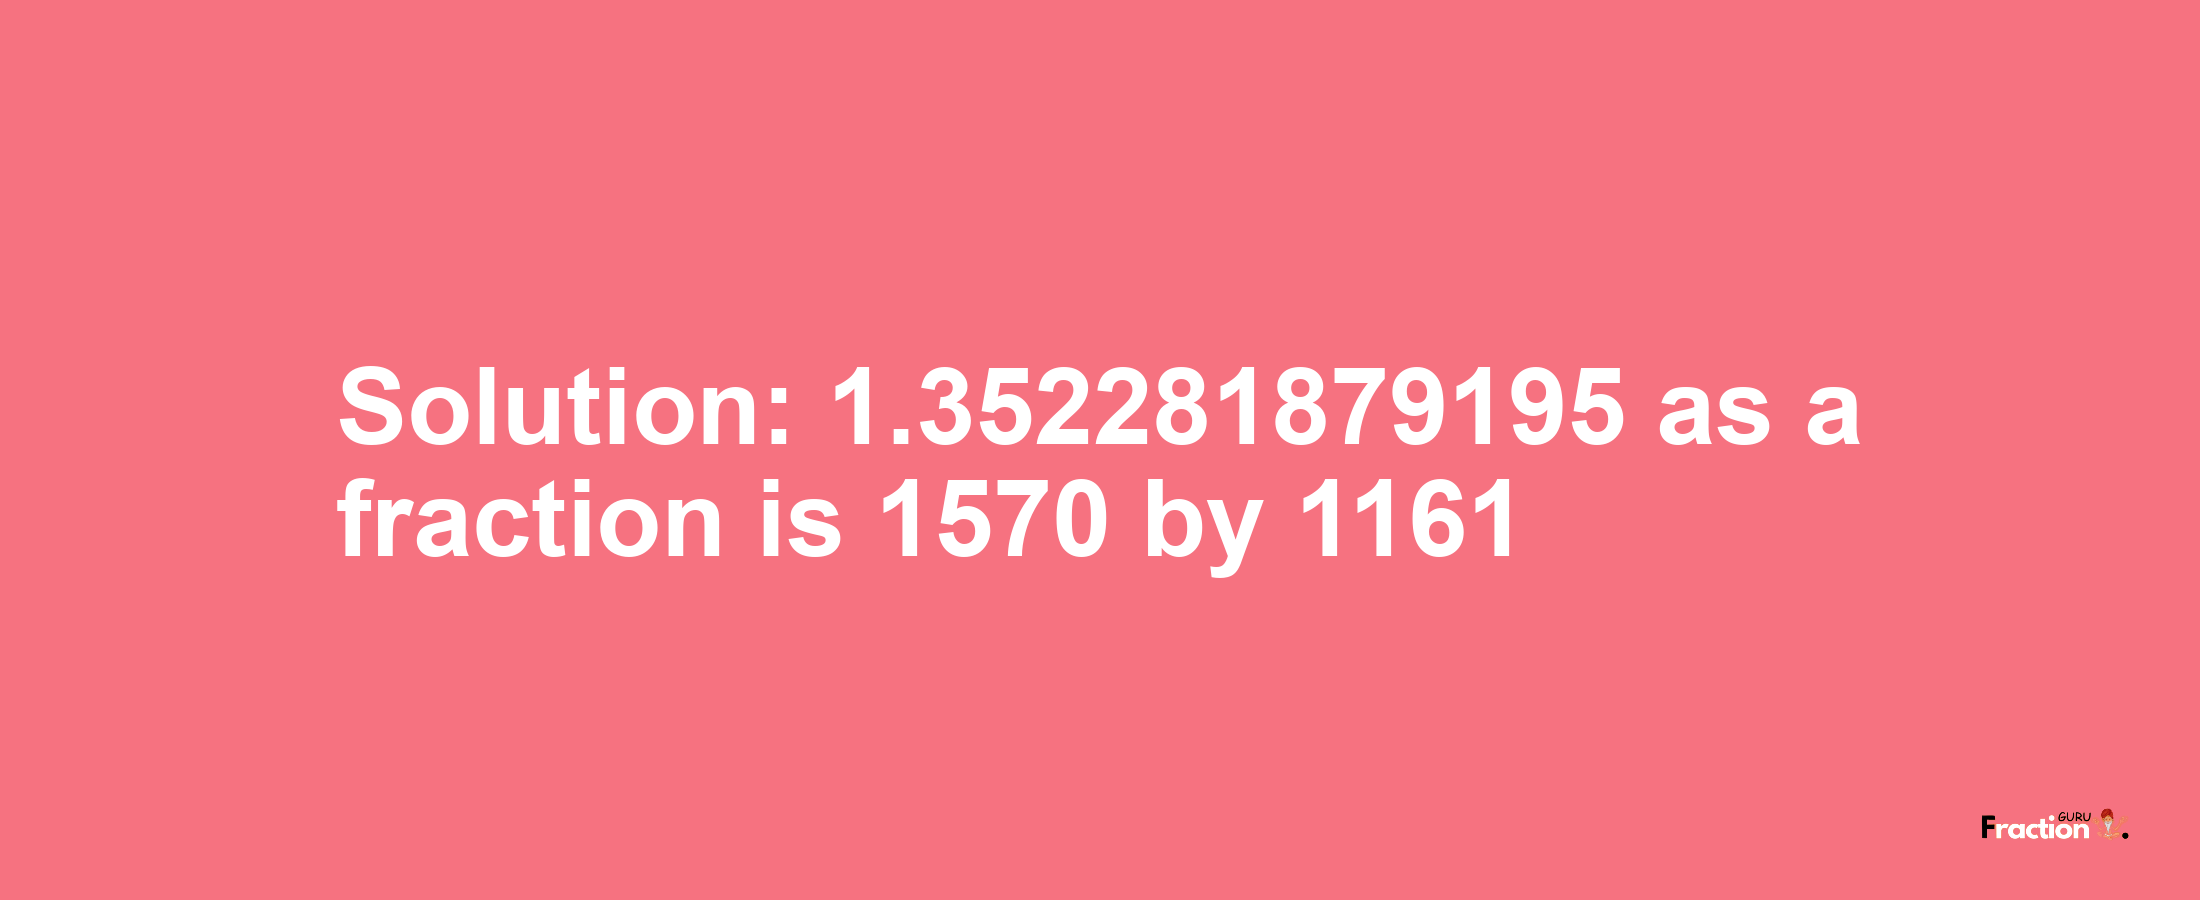 Solution:1.352281879195 as a fraction is 1570/1161